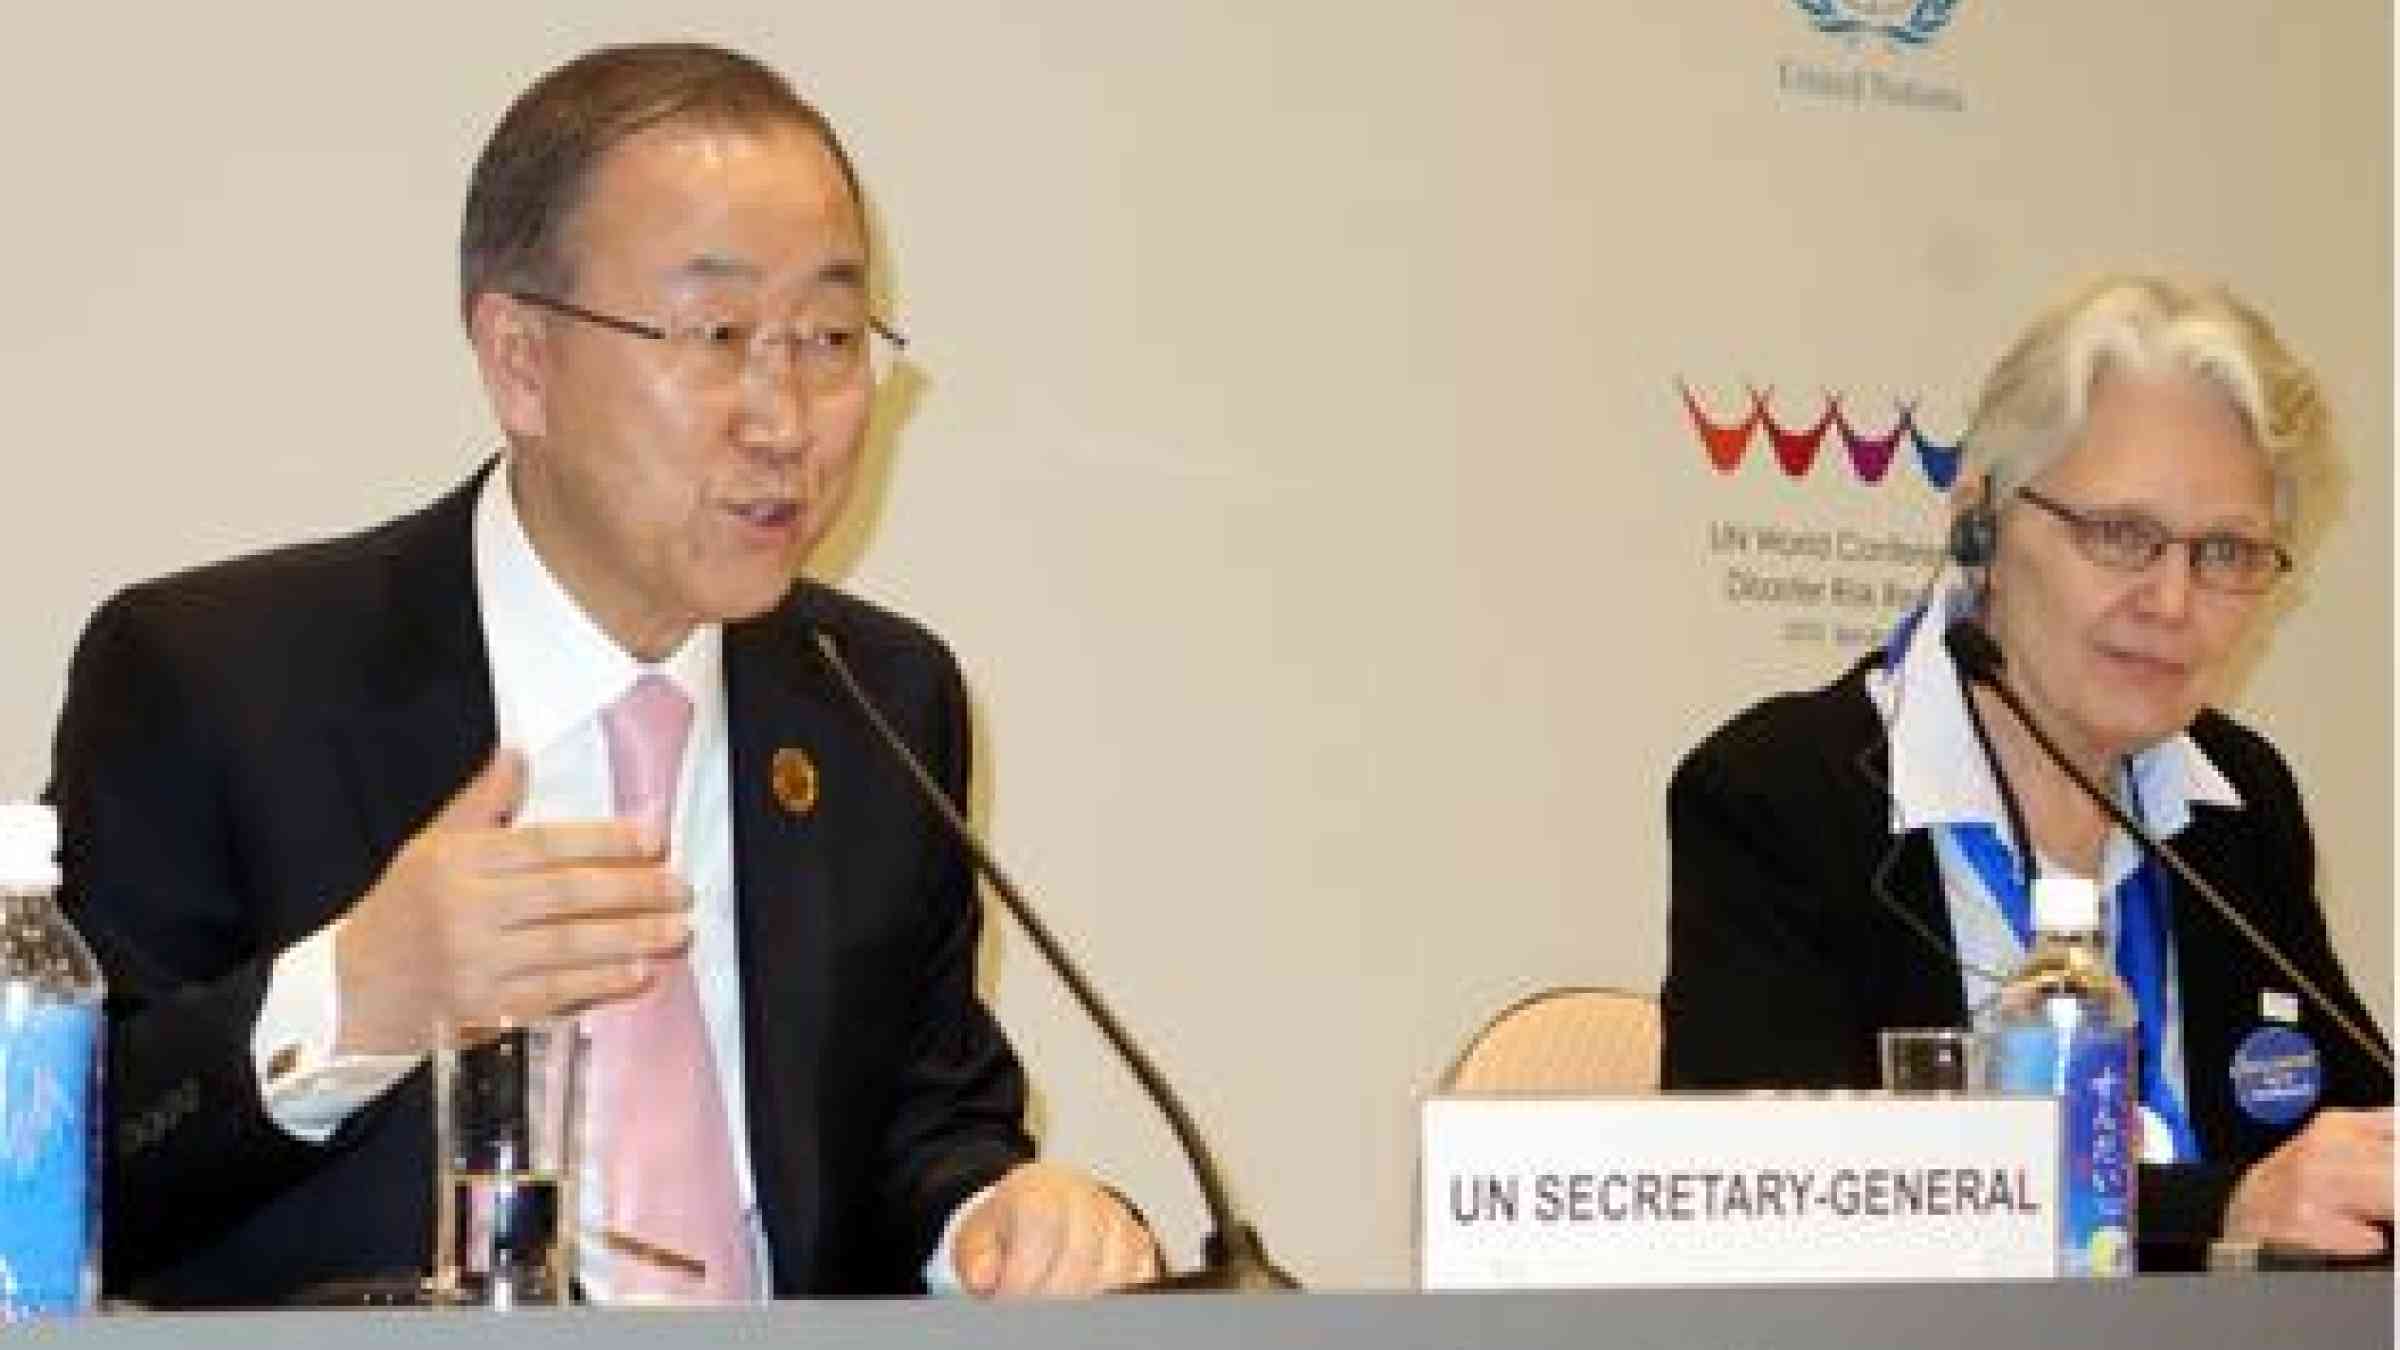 UN Secretary-General Ban Ki-moon and UNISDR chief Margareta Wahlstrom briefing the media in Sendai, Japan,  at the World Conference which adopted the Sendai Framework for Disaster Risk Reduction in March. (Photo: UNISDR)